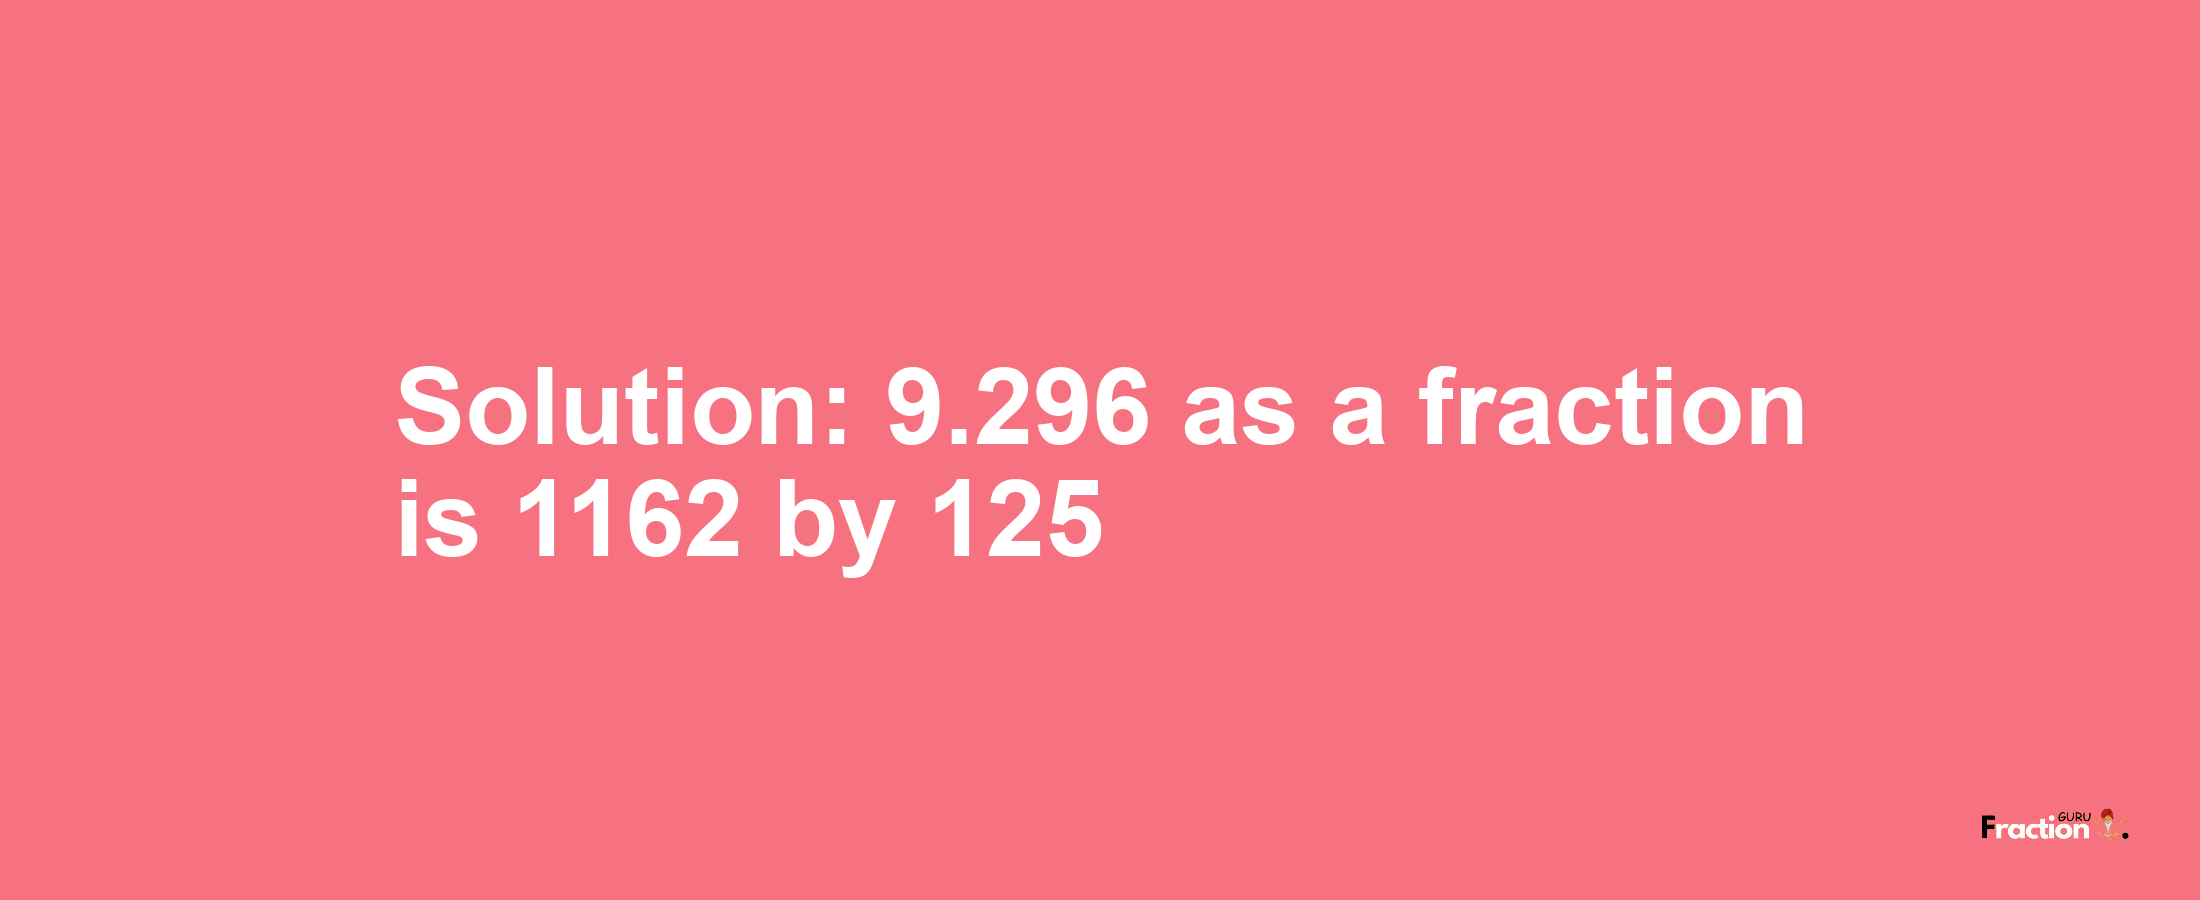 Solution:9.296 as a fraction is 1162/125